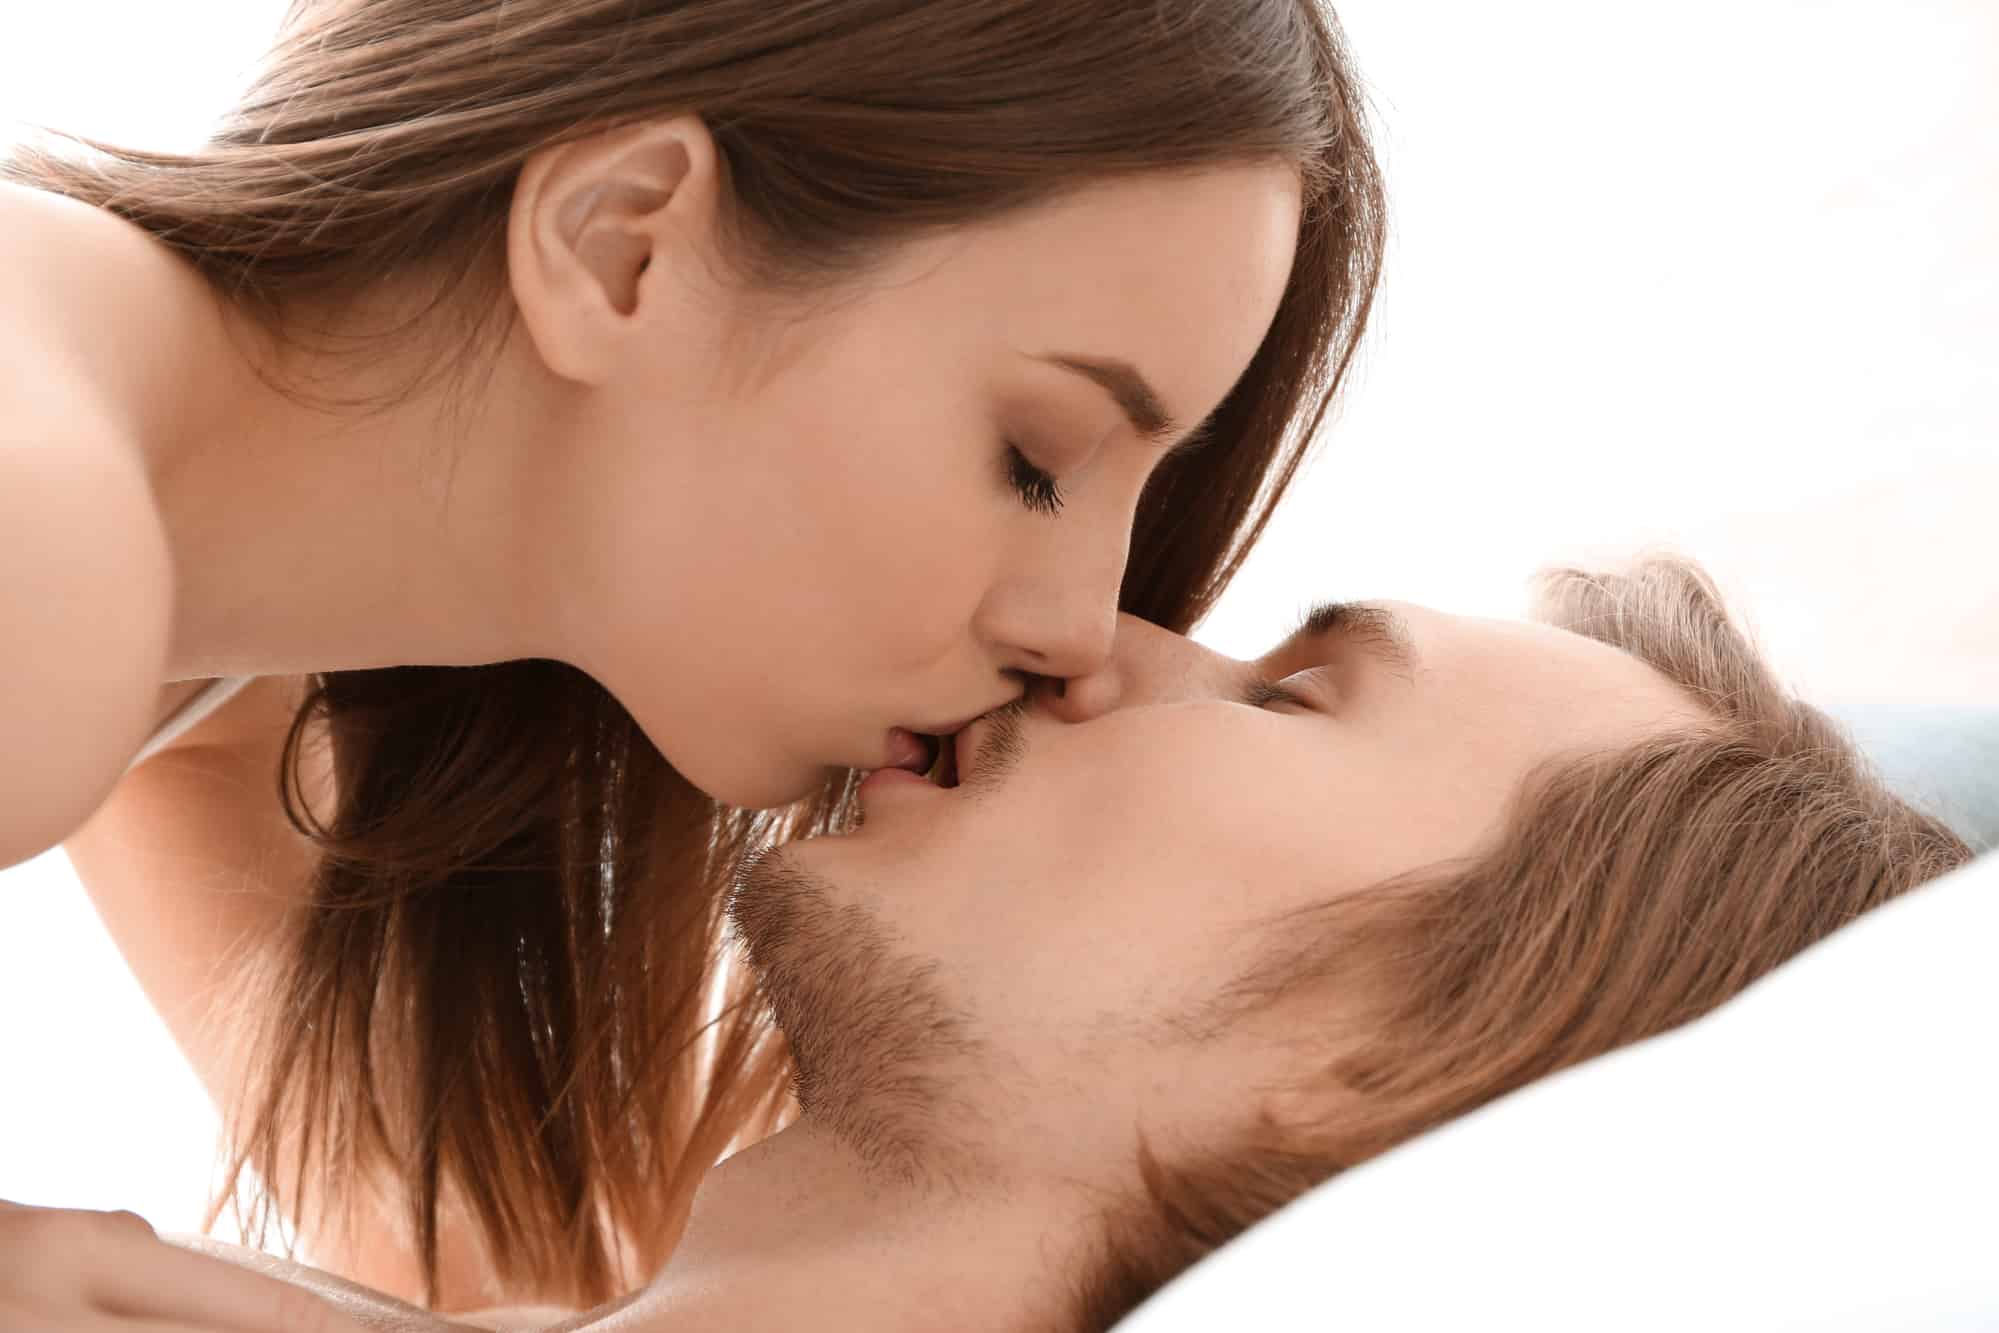 Romantic how to kiss give Cute I